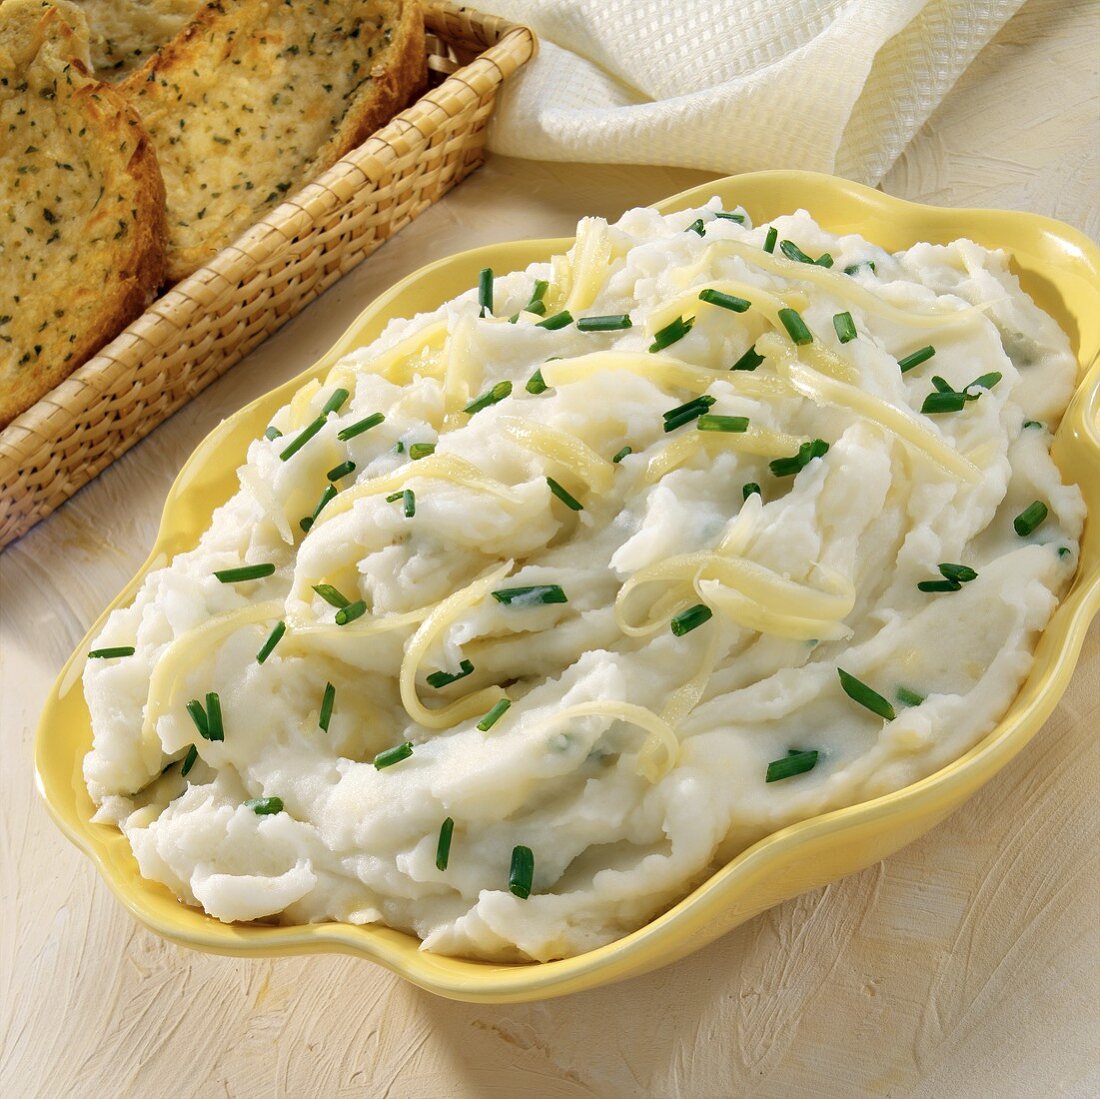 Mashed potatoes with grated cheese and chives